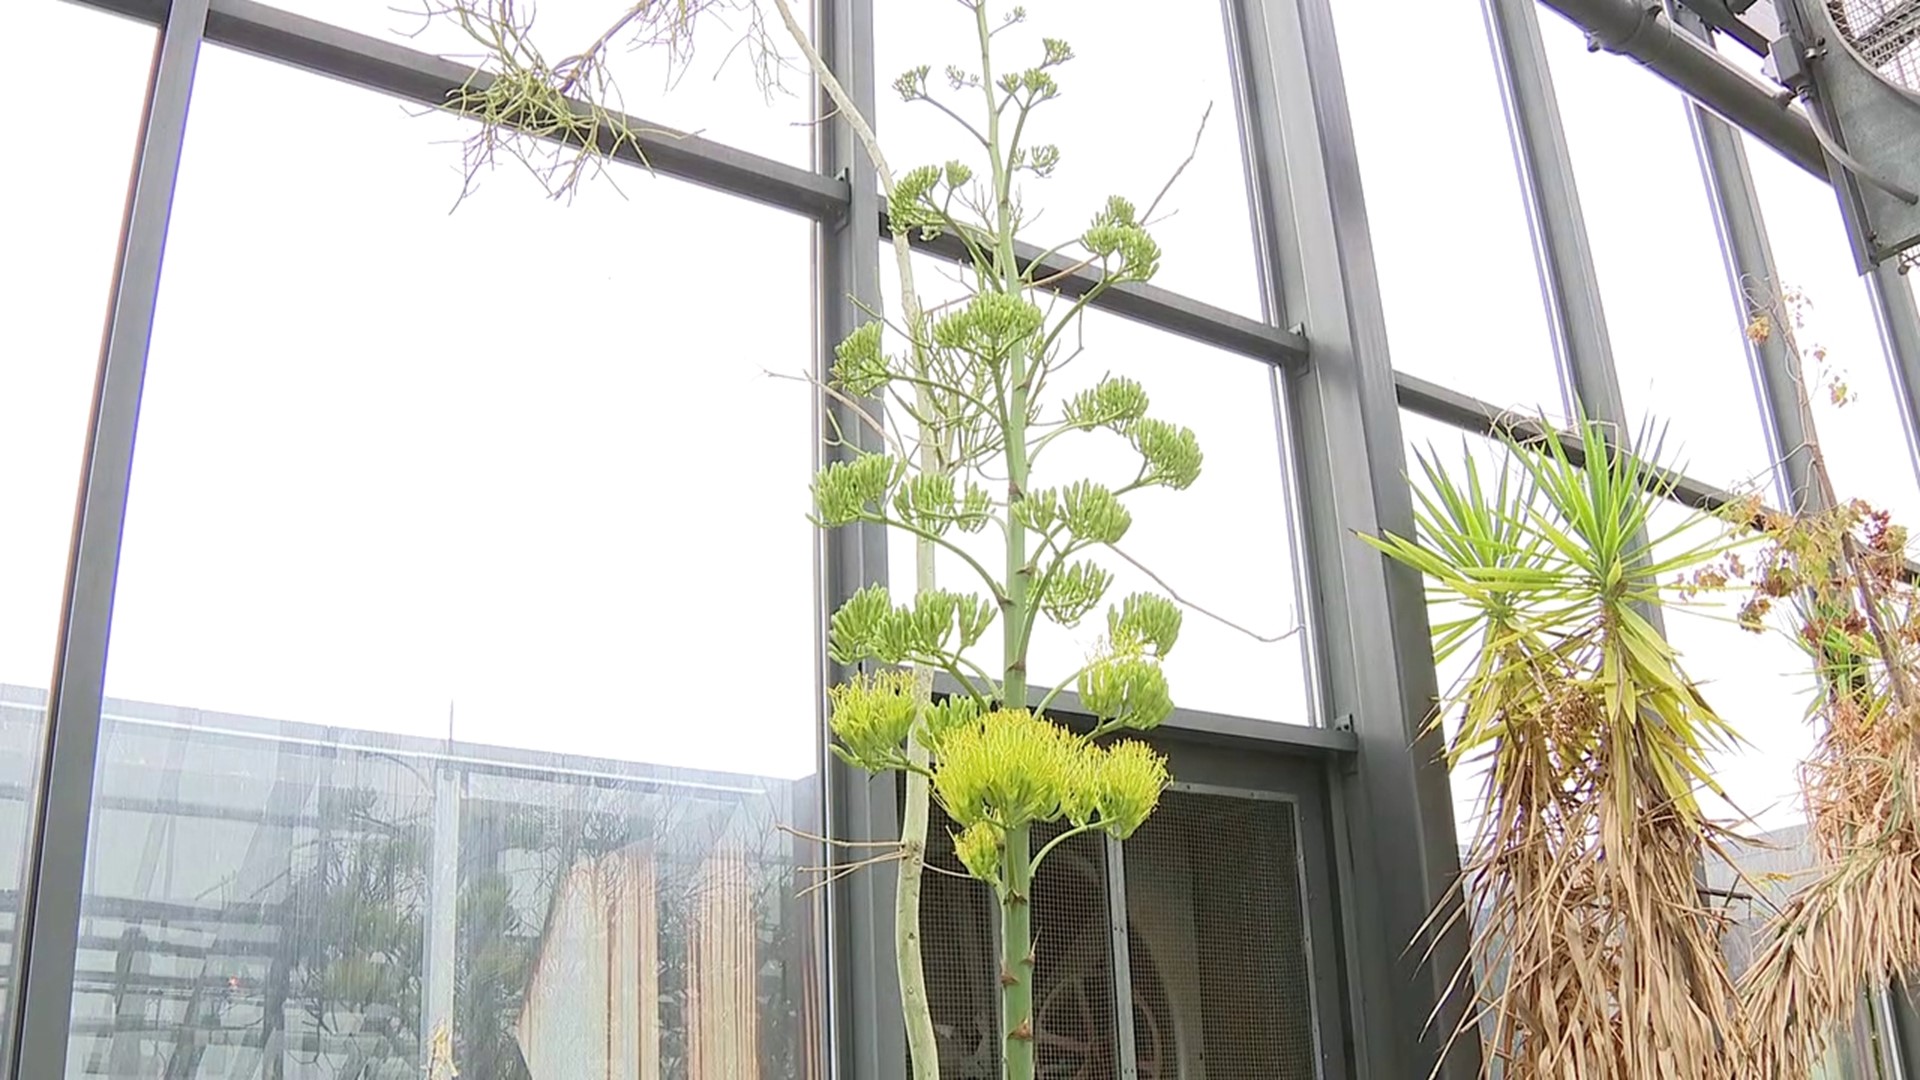 A plant that only blooms once every 30 years is blooming at Bucknell University.